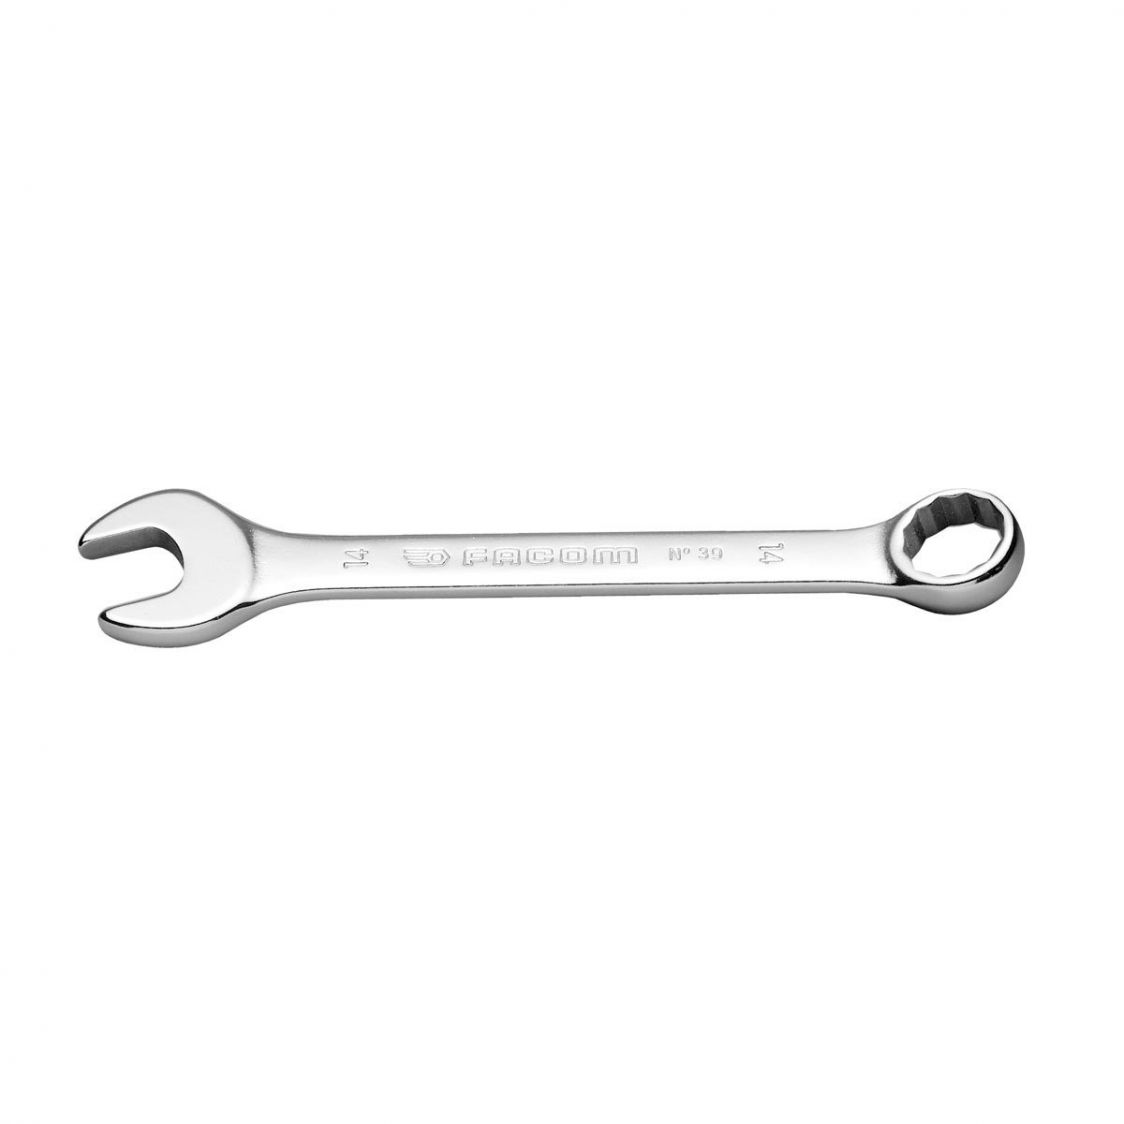 FACOM 39.16 - 16mm Metric Stubby Combination Spanner